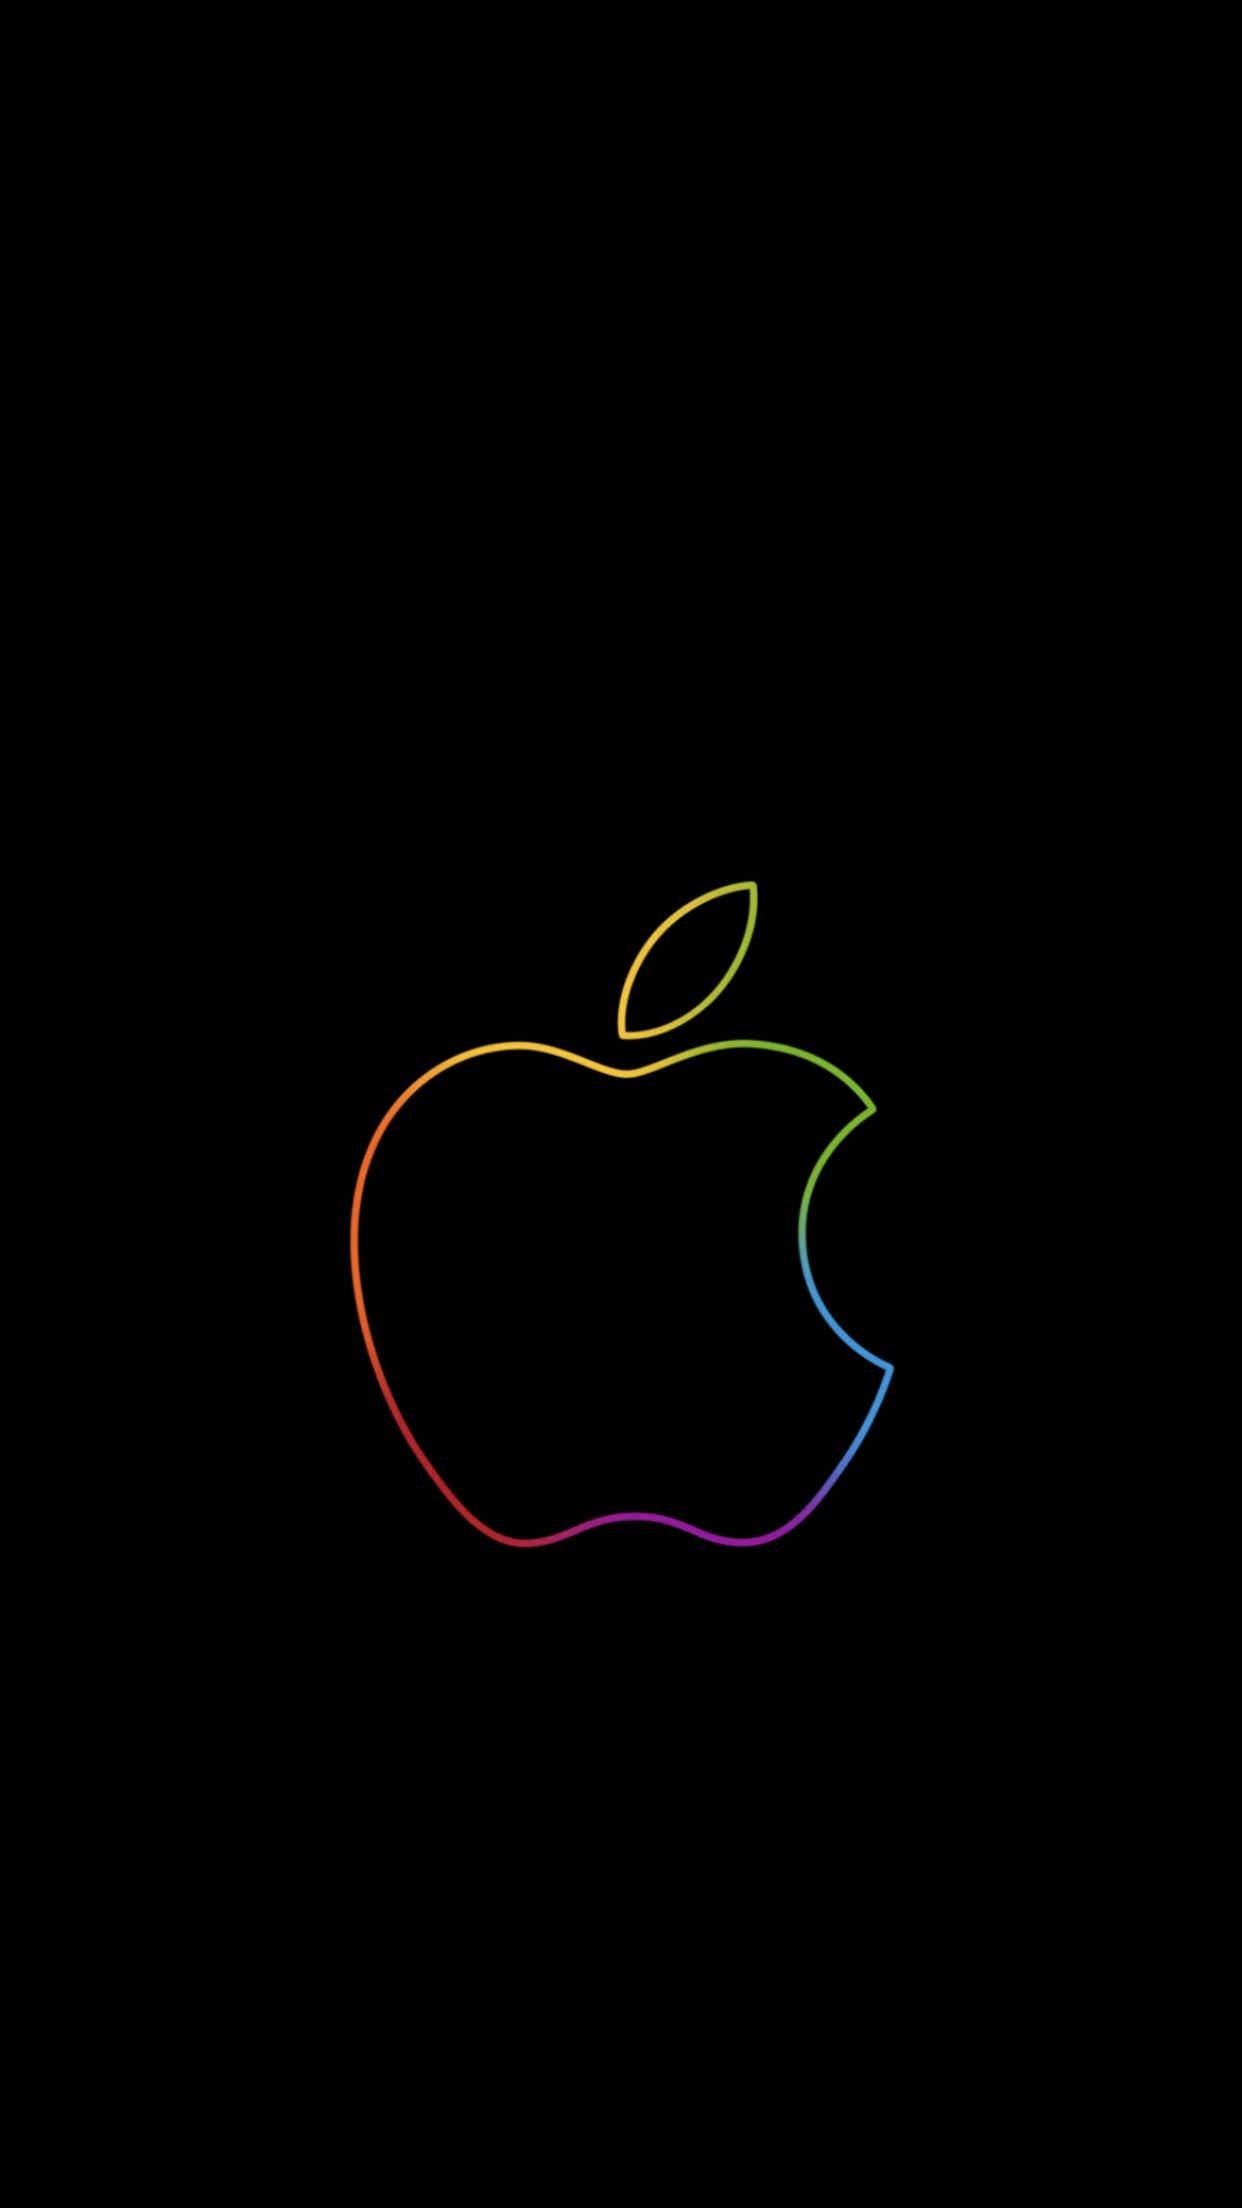 iOS 12 Wallpaper for iPhone Xs, Xs Max and Xr